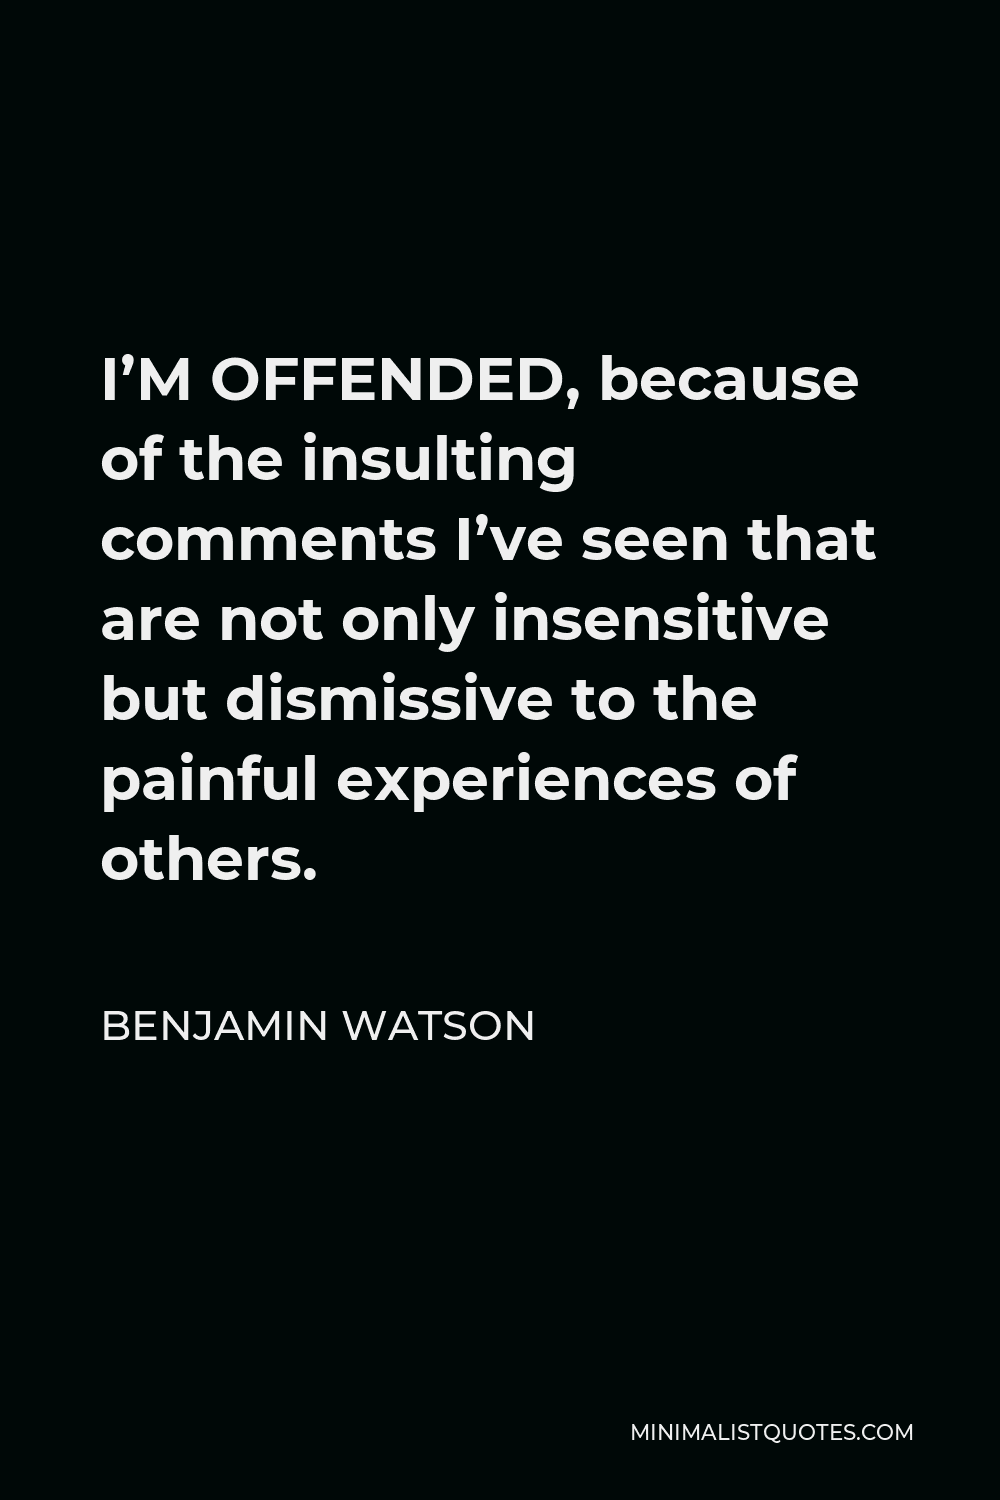 Benjamin Watson Quote - I’M OFFENDED, because of the insulting comments I’ve seen that are not only insensitive but dismissive to the painful experiences of others.